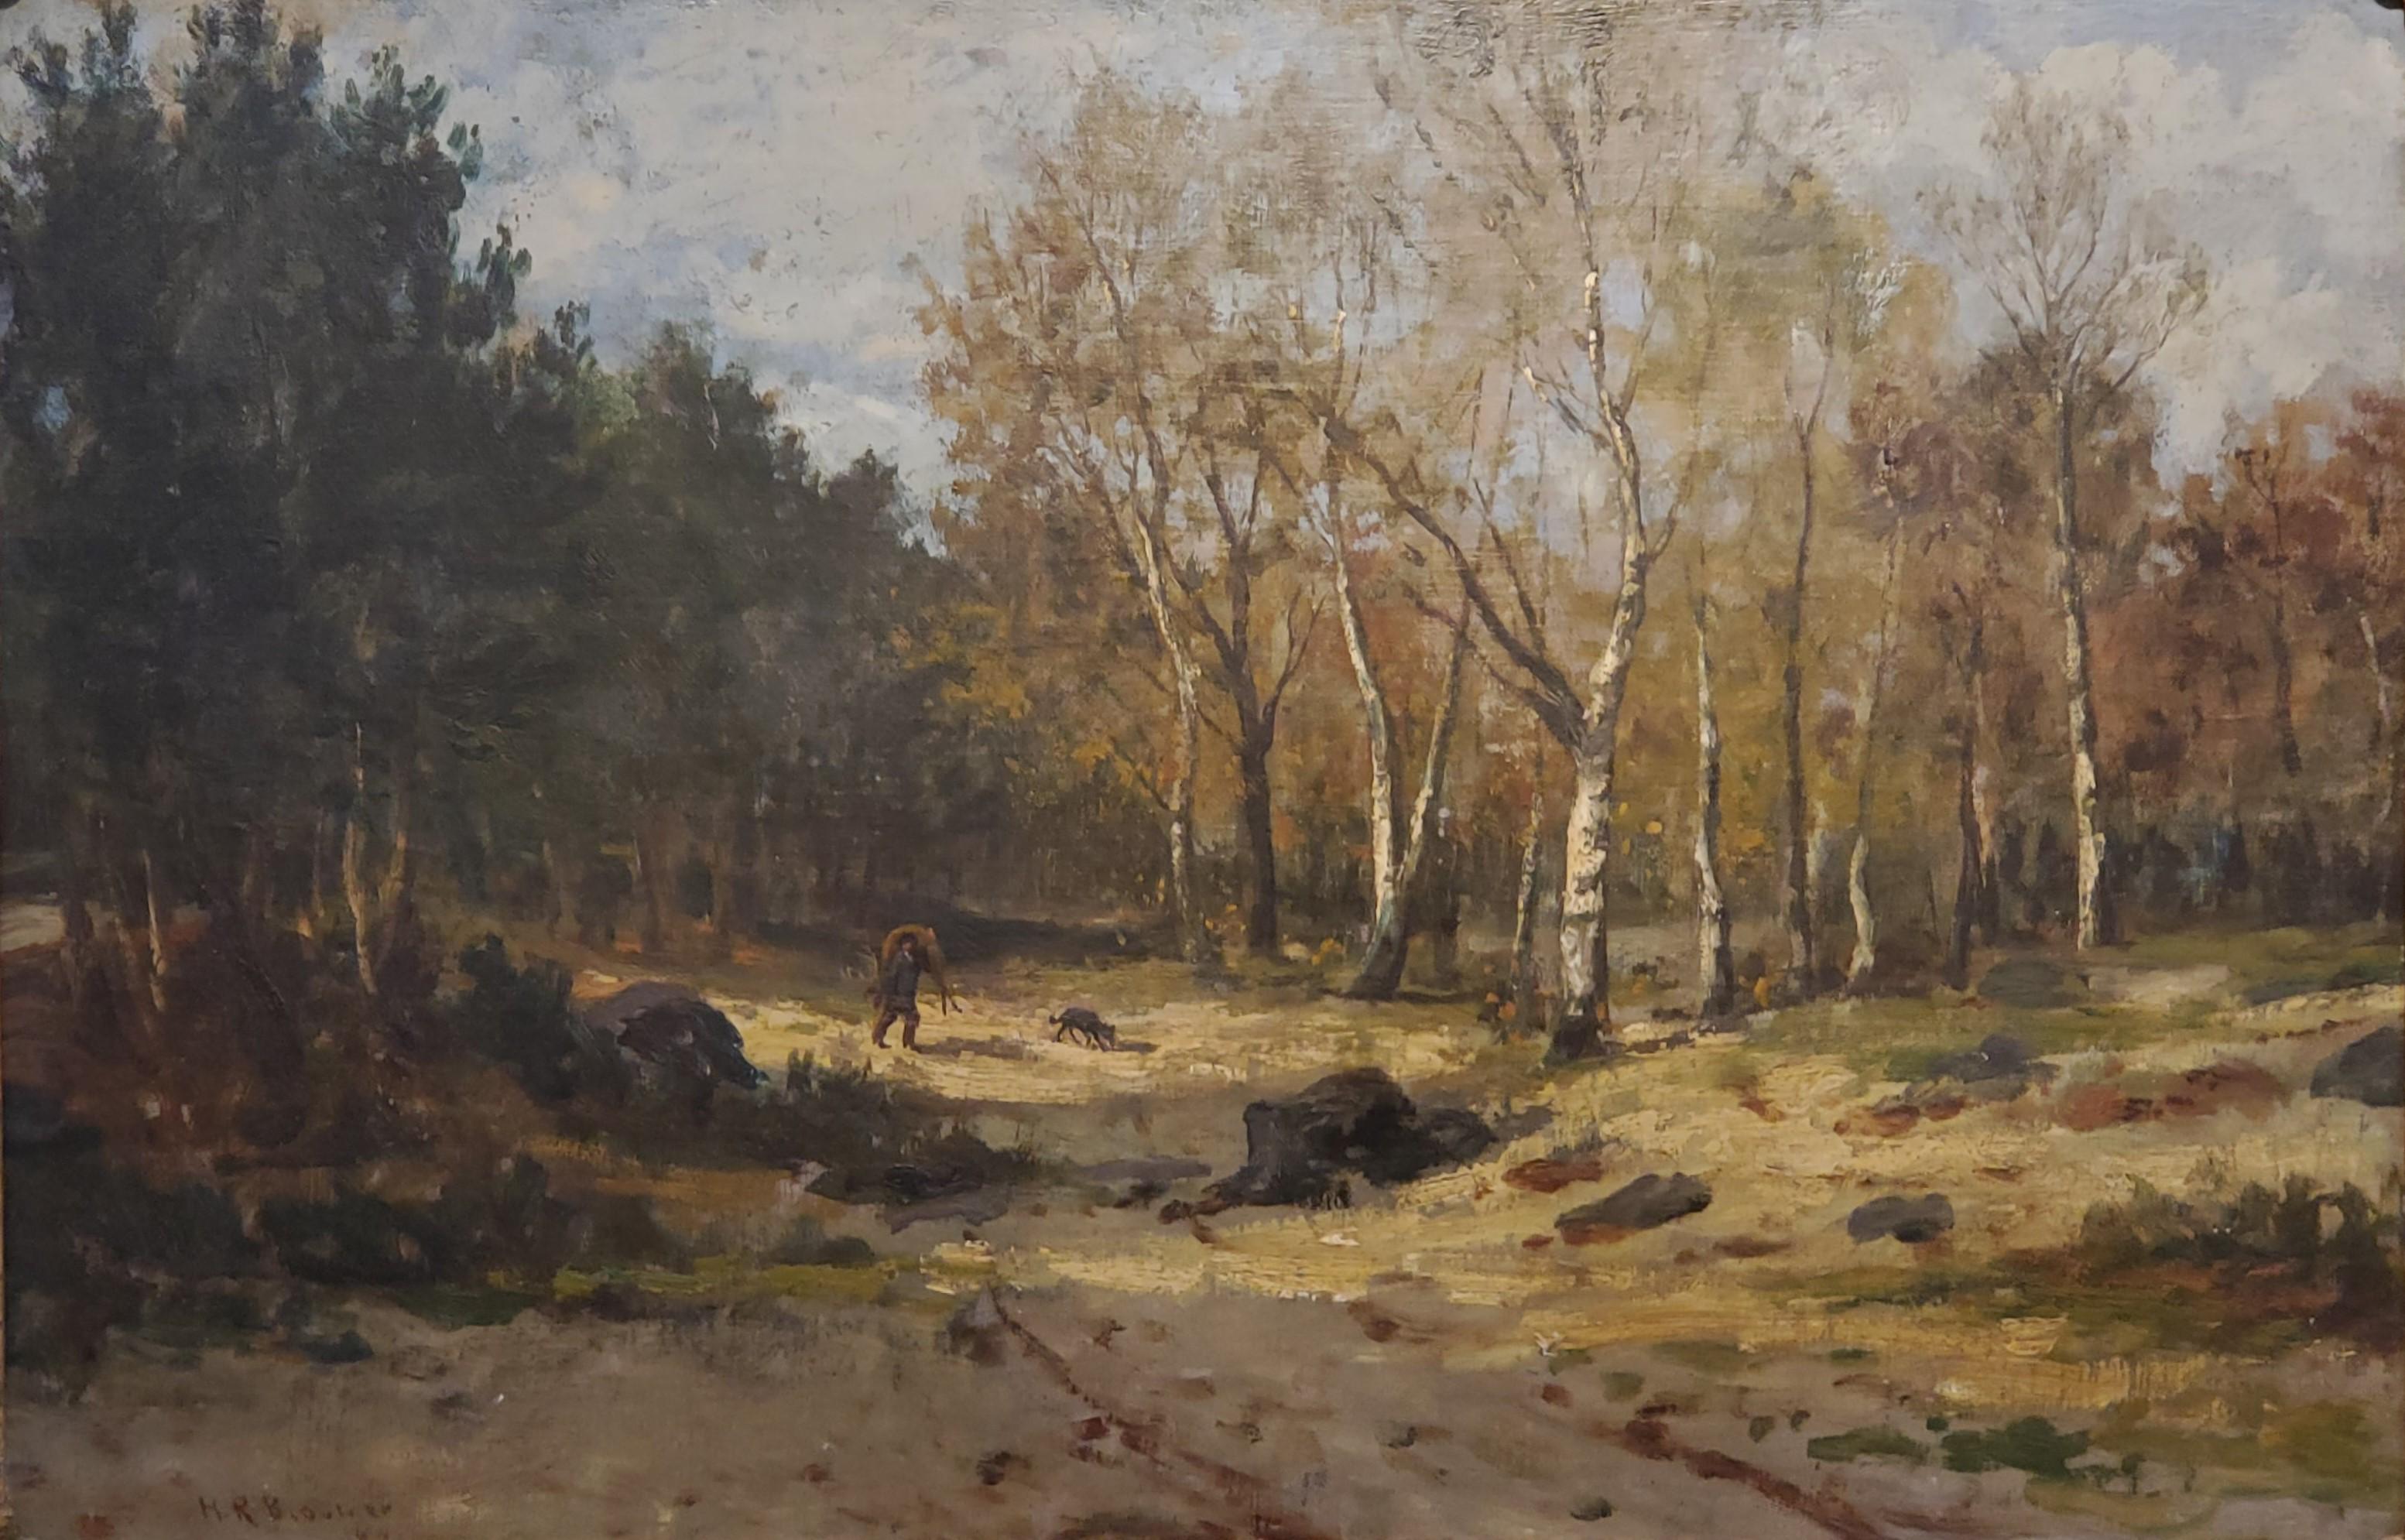 Hunting Deer In The Woods During Autumn With His Dog - Painting by  Hiram Reynolds Bloomer